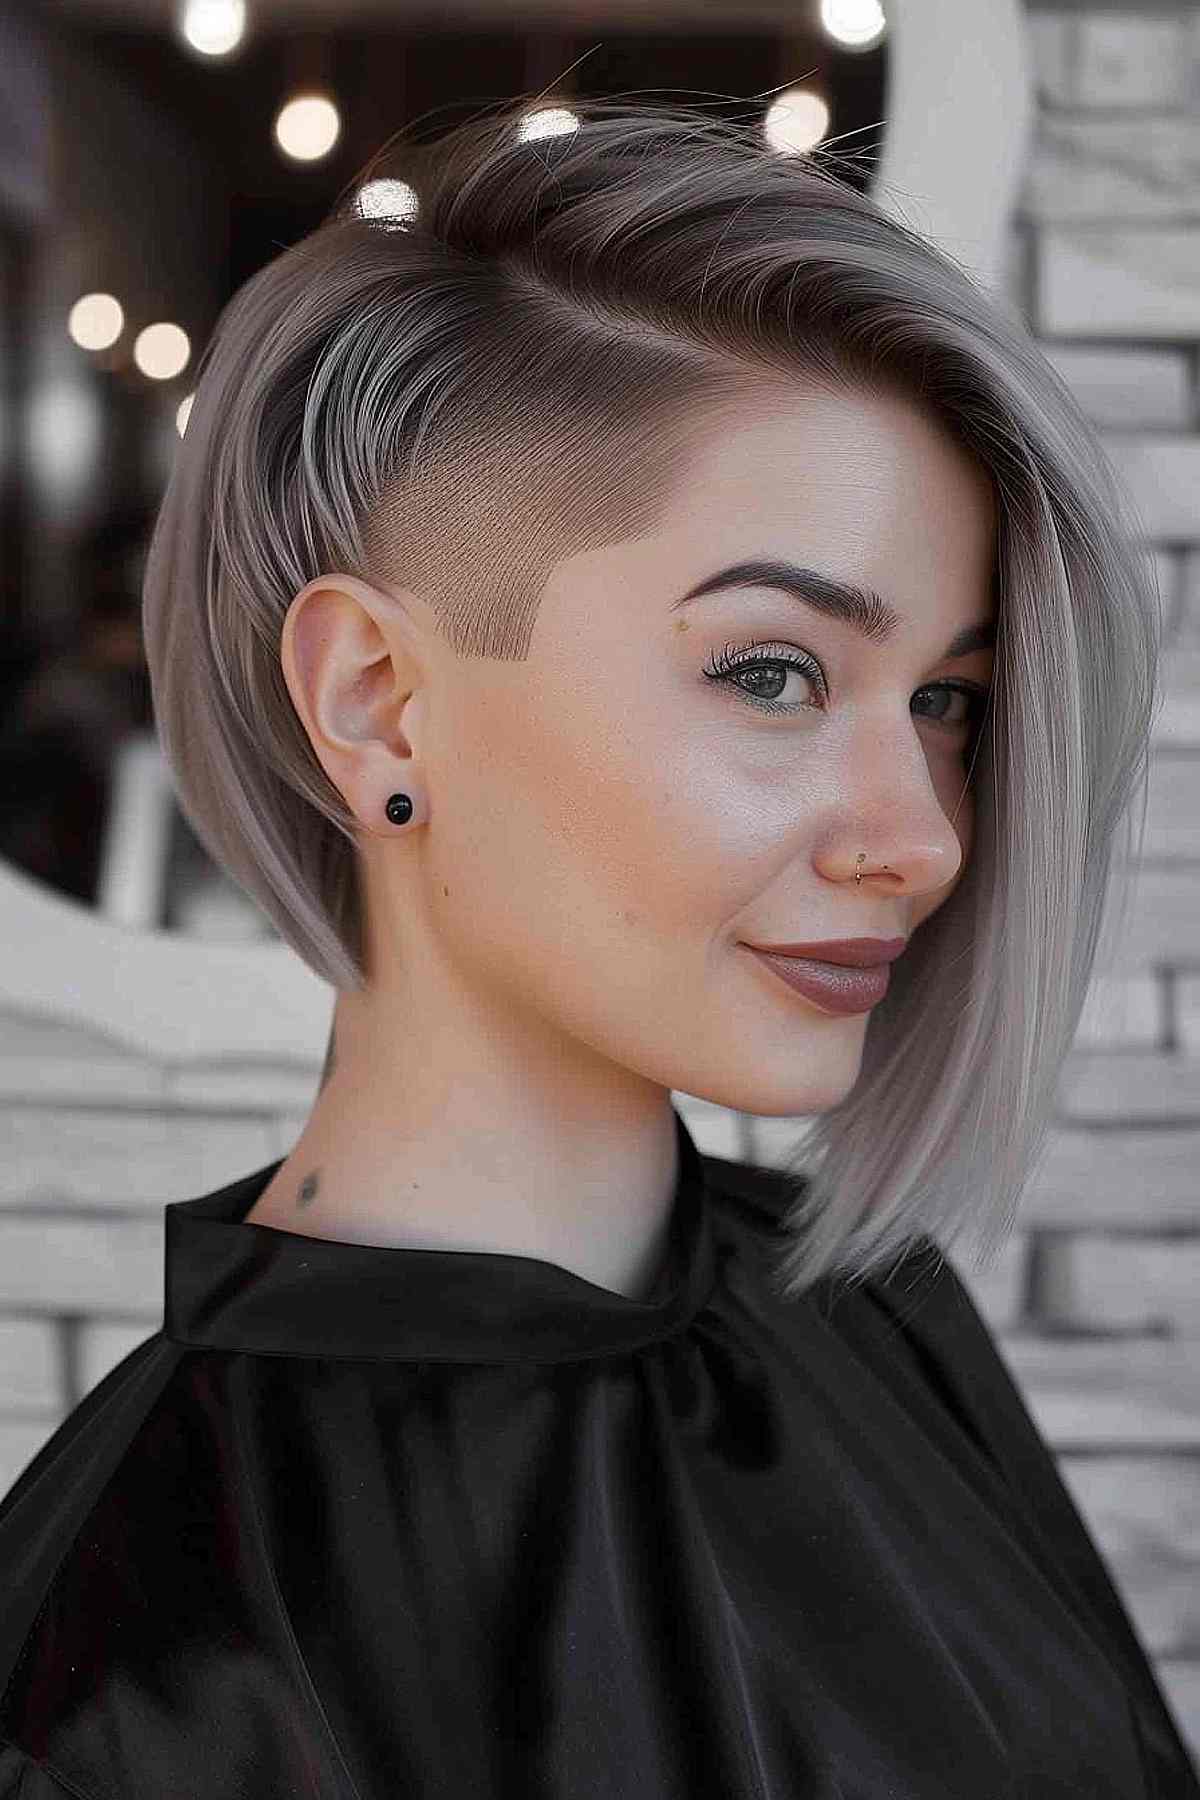 Sleek long undercut bob with dramatic side shave for fine to medium hair types, perfect for oval and heart-shaped faces